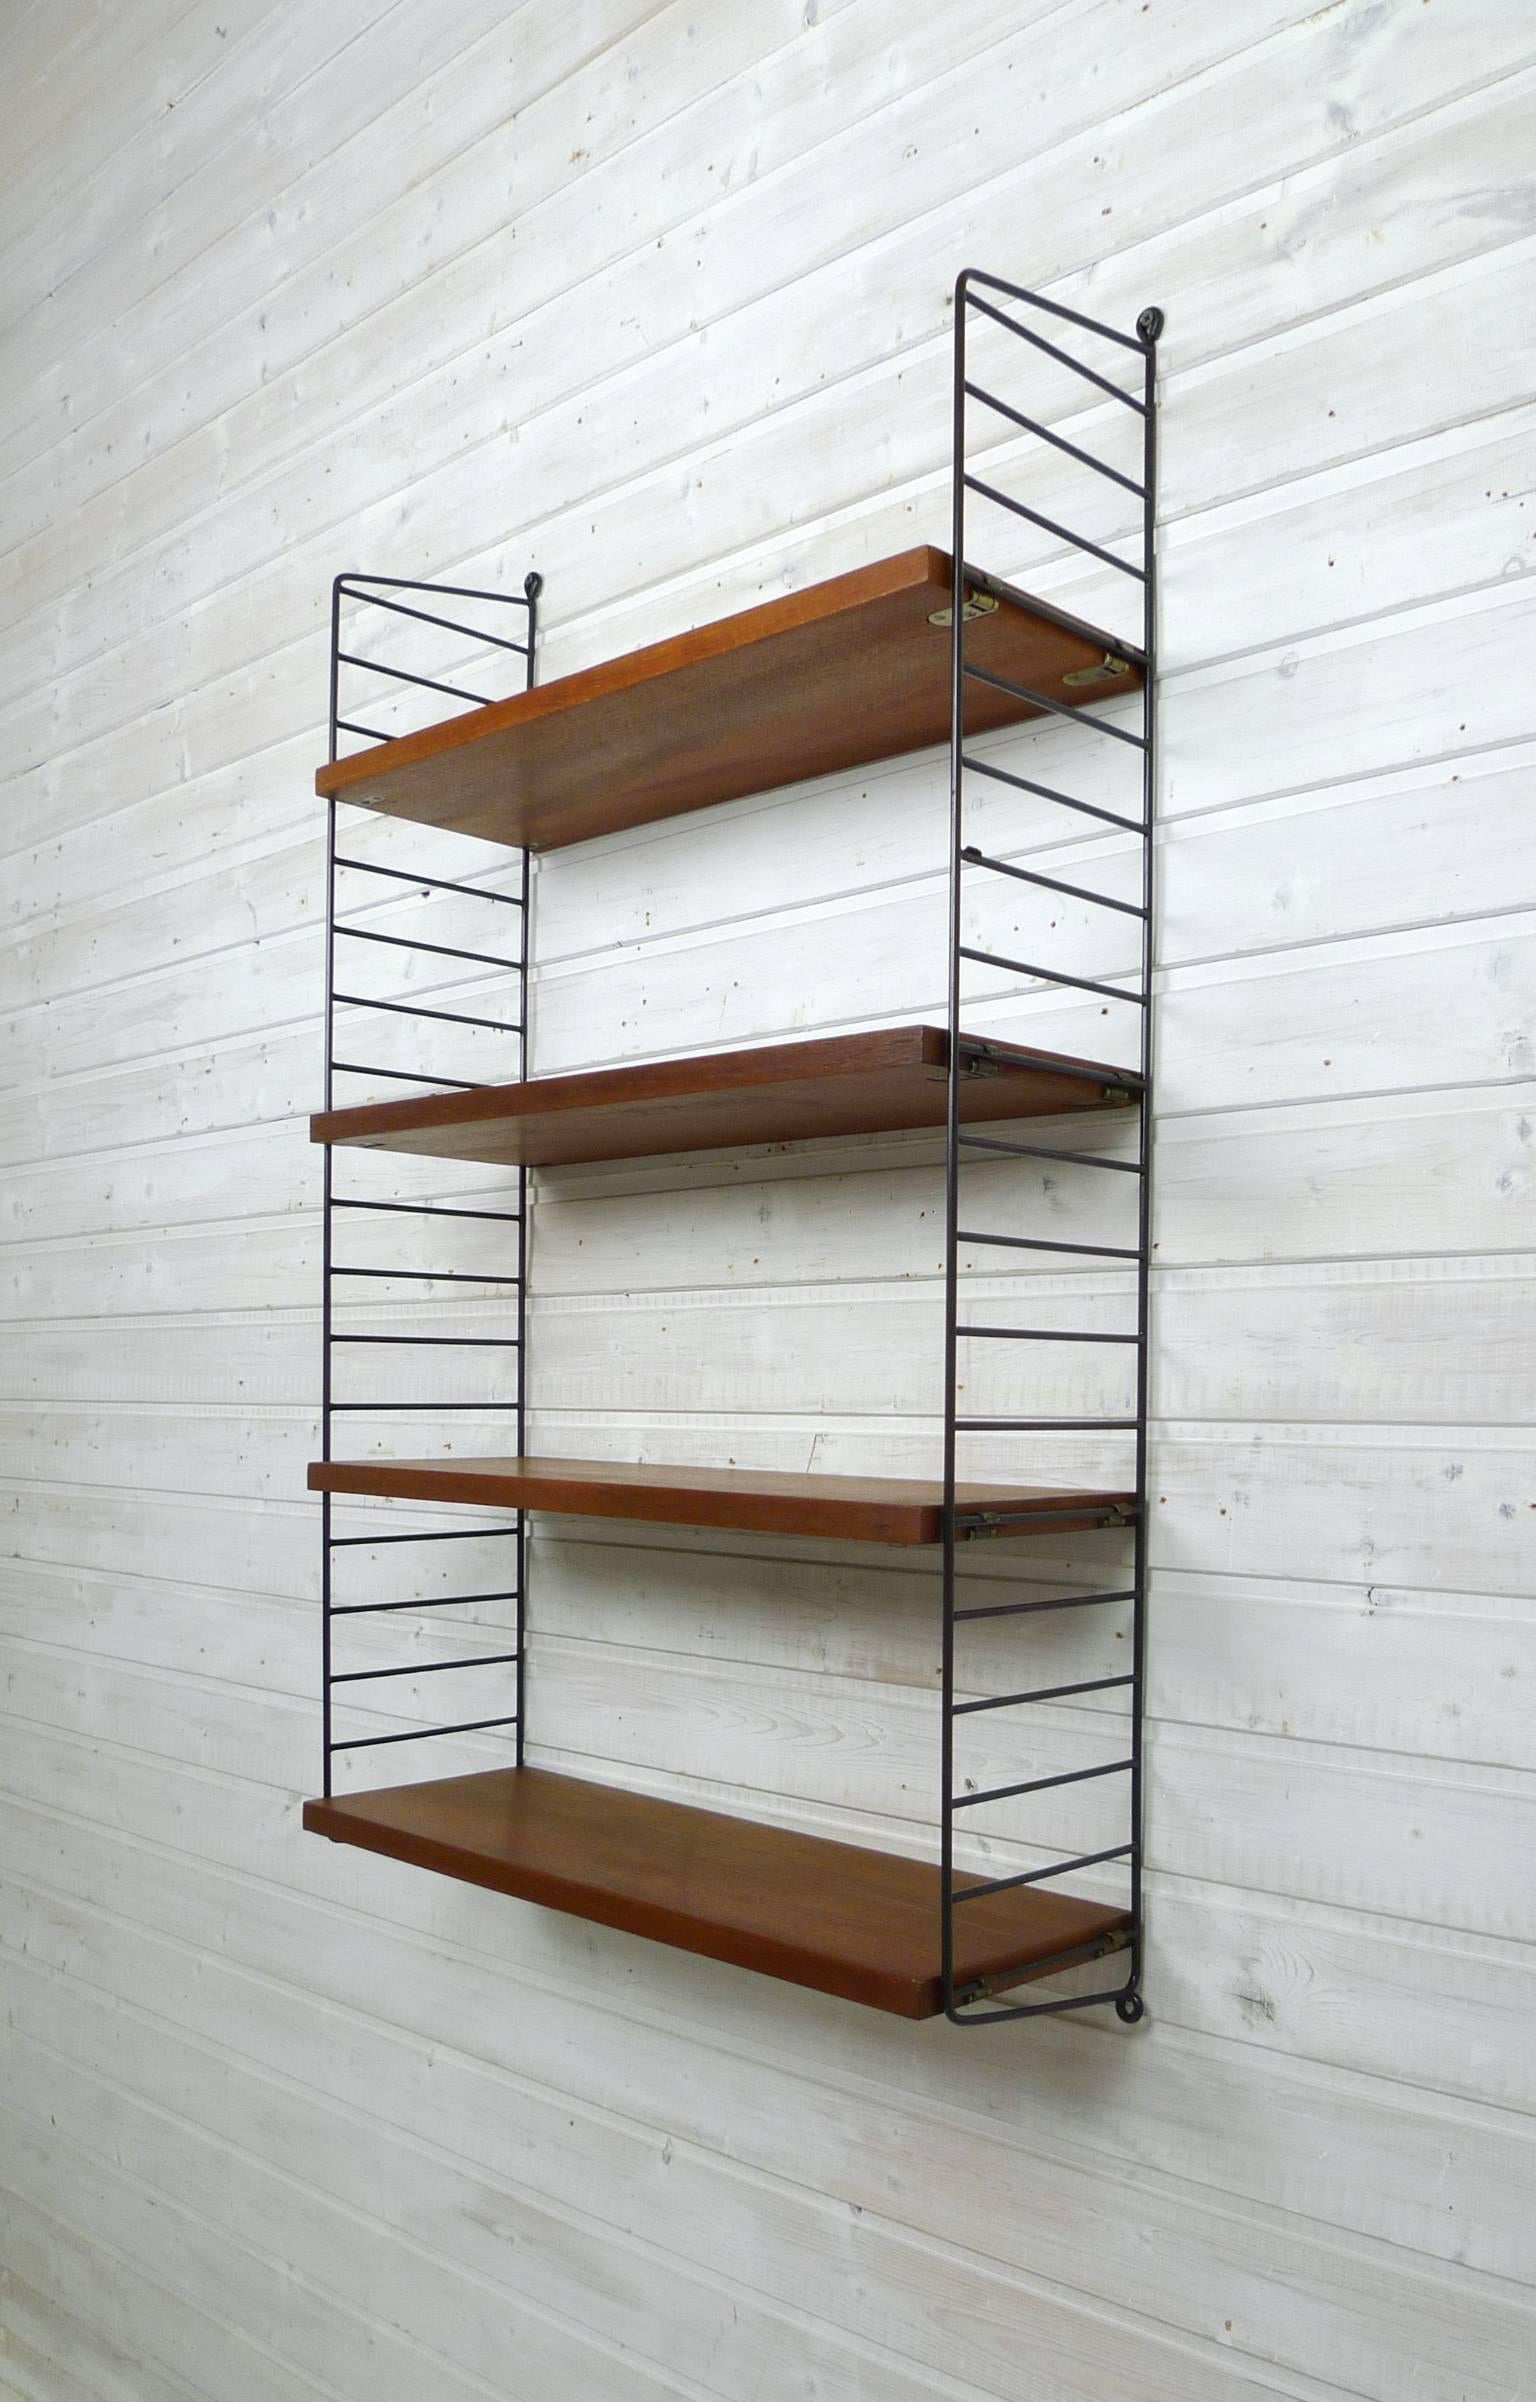 20th Century Swedish Wall Unit with Four Teak Shelves by Nisse Strinning for String, 1950s